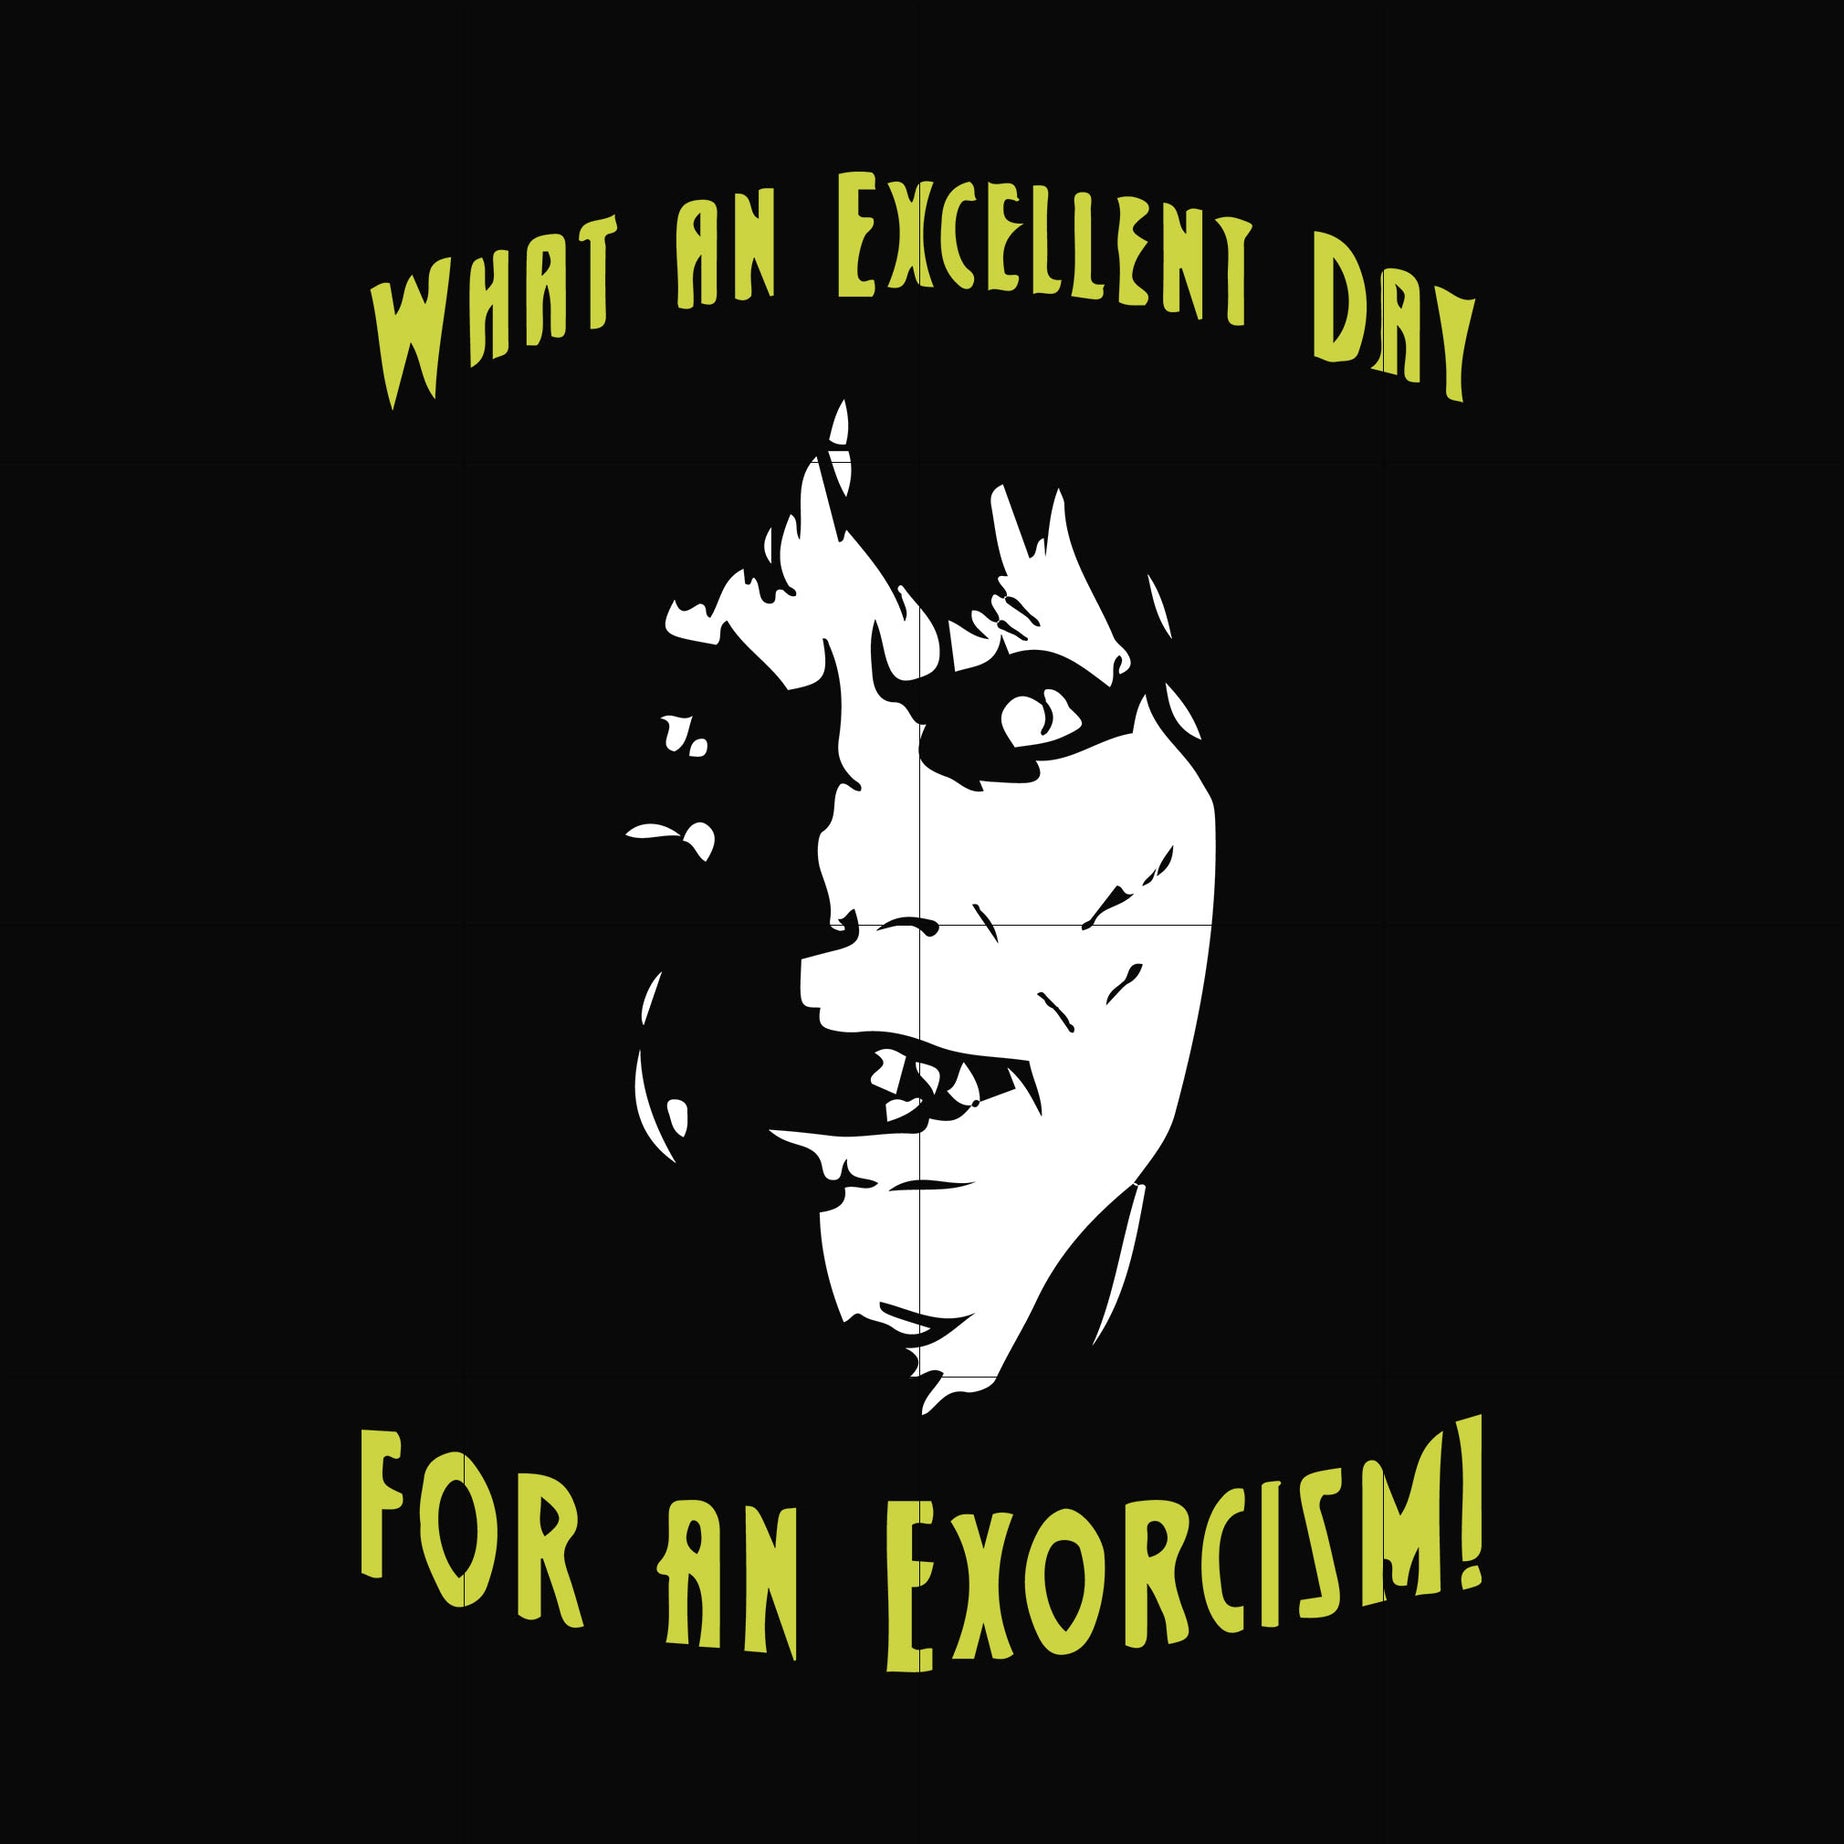 What an excellent day for an exorcism svg, png, dxf, eps file FN0001015